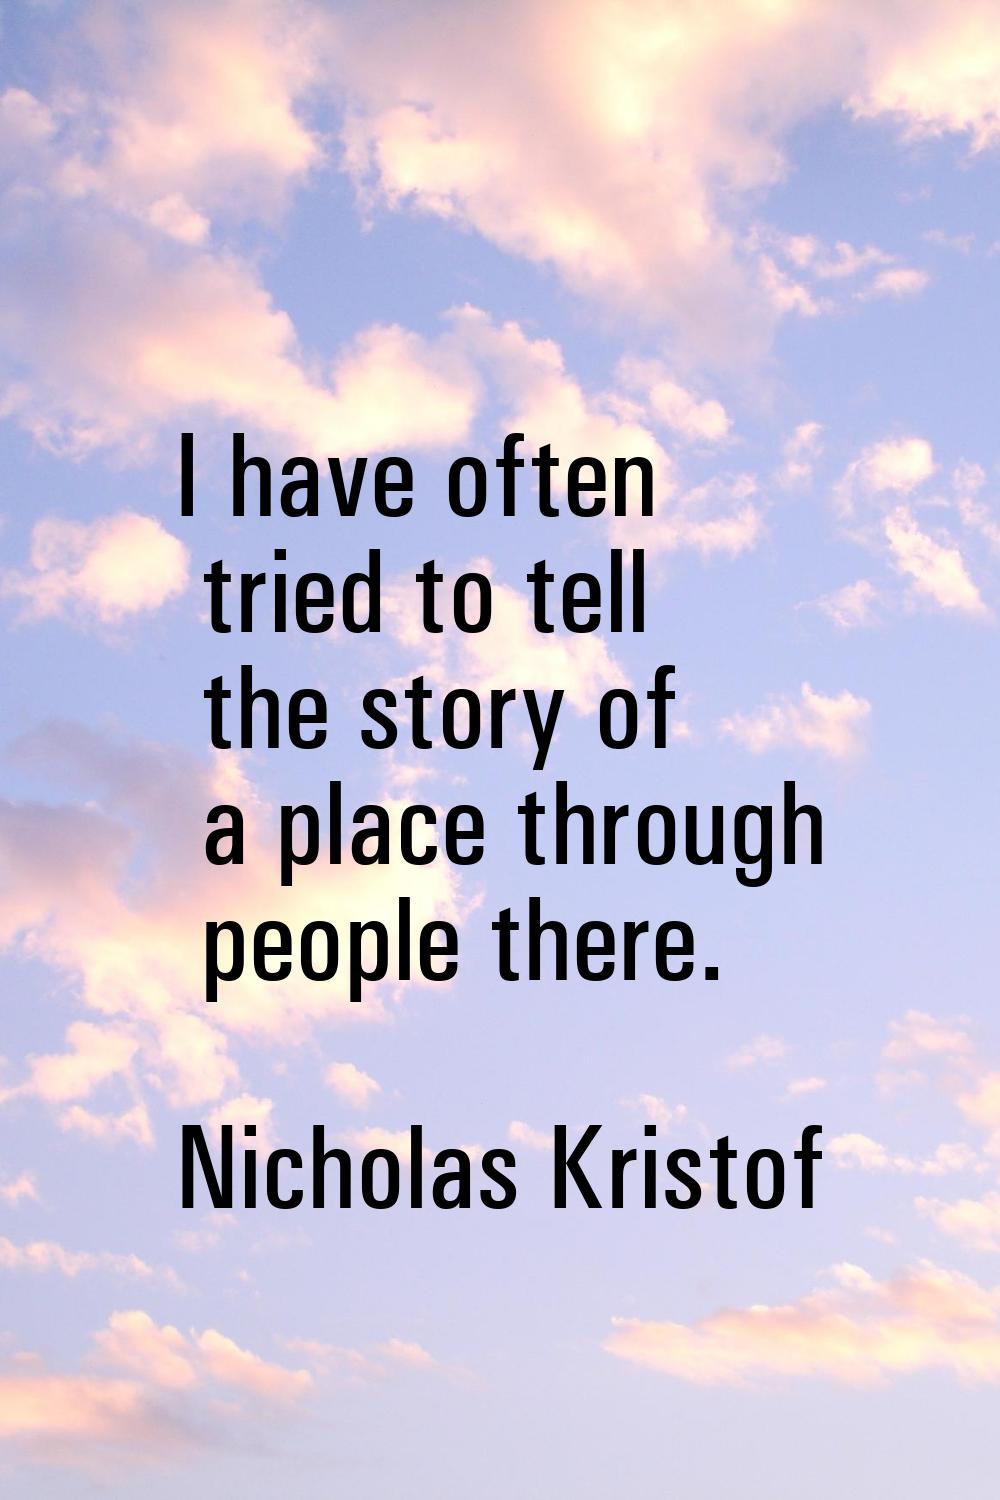 I have often tried to tell the story of a place through people there.